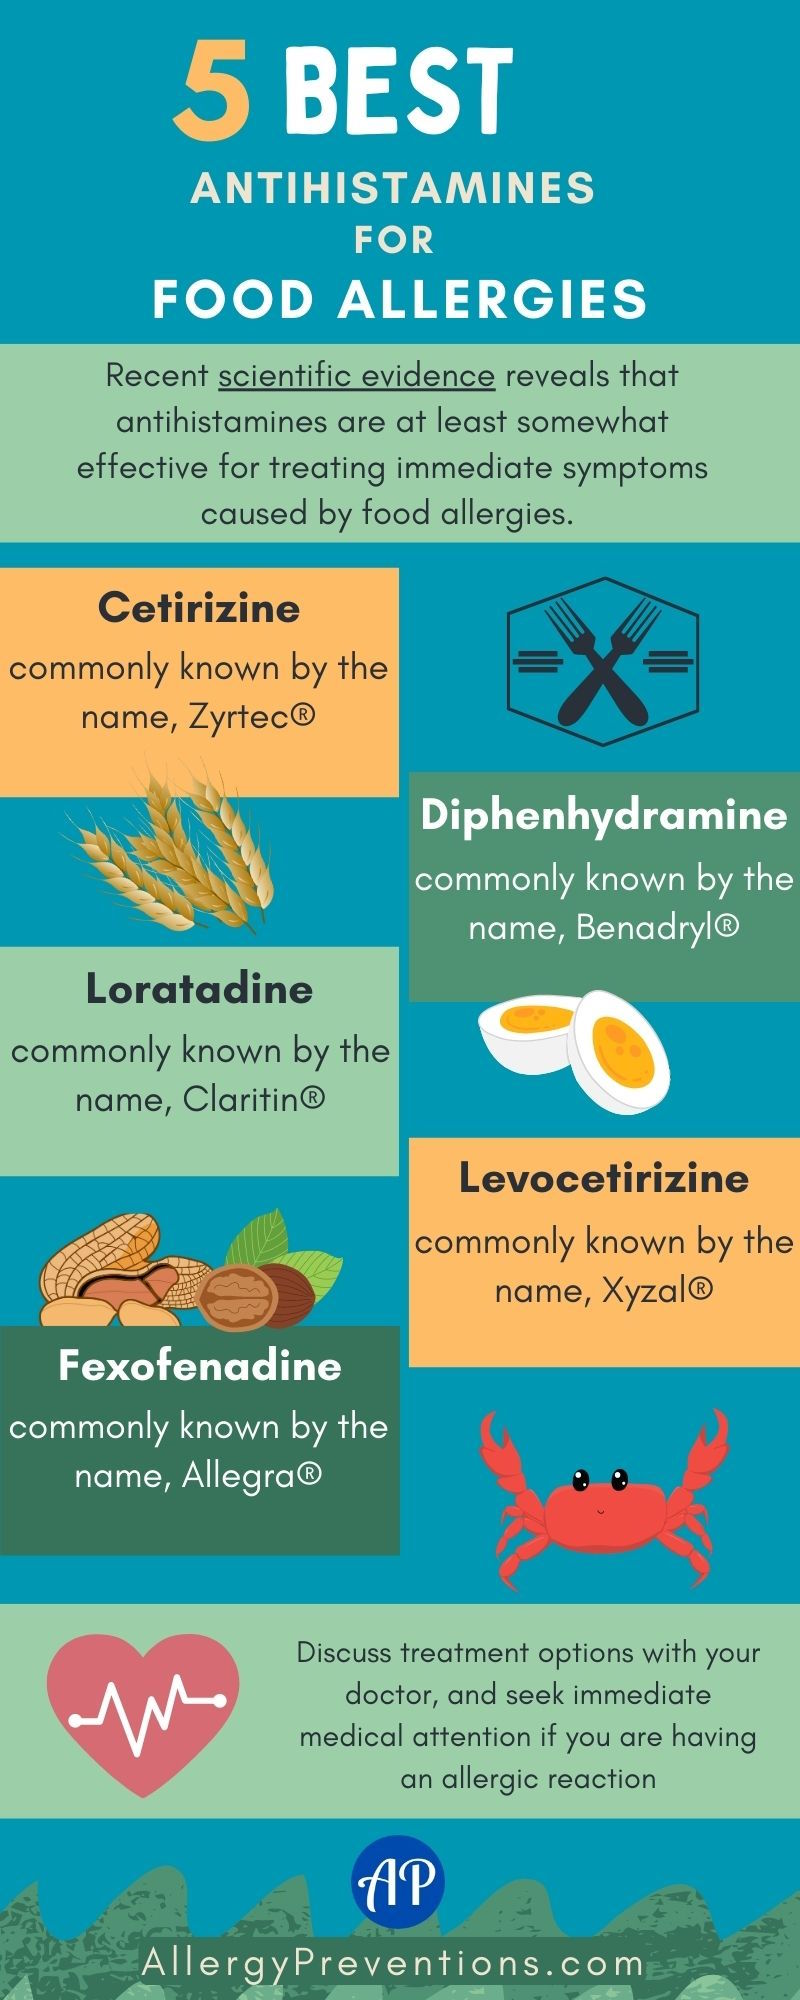 Best antihistamines for food allergies infographic. Scientific evidence reveals that antihistamines are at least somewhat effective for treating immediate allergy symptoms caused by food allergies. The best antihistamines for allergic reactions to foods are Cetirizine, Diphenhydramine, Loratadine, Levocetirizine, and Fexofenadine. Discuss treatment options with your doctor, and seek immediate medical attention if you are having an allergic reaction.